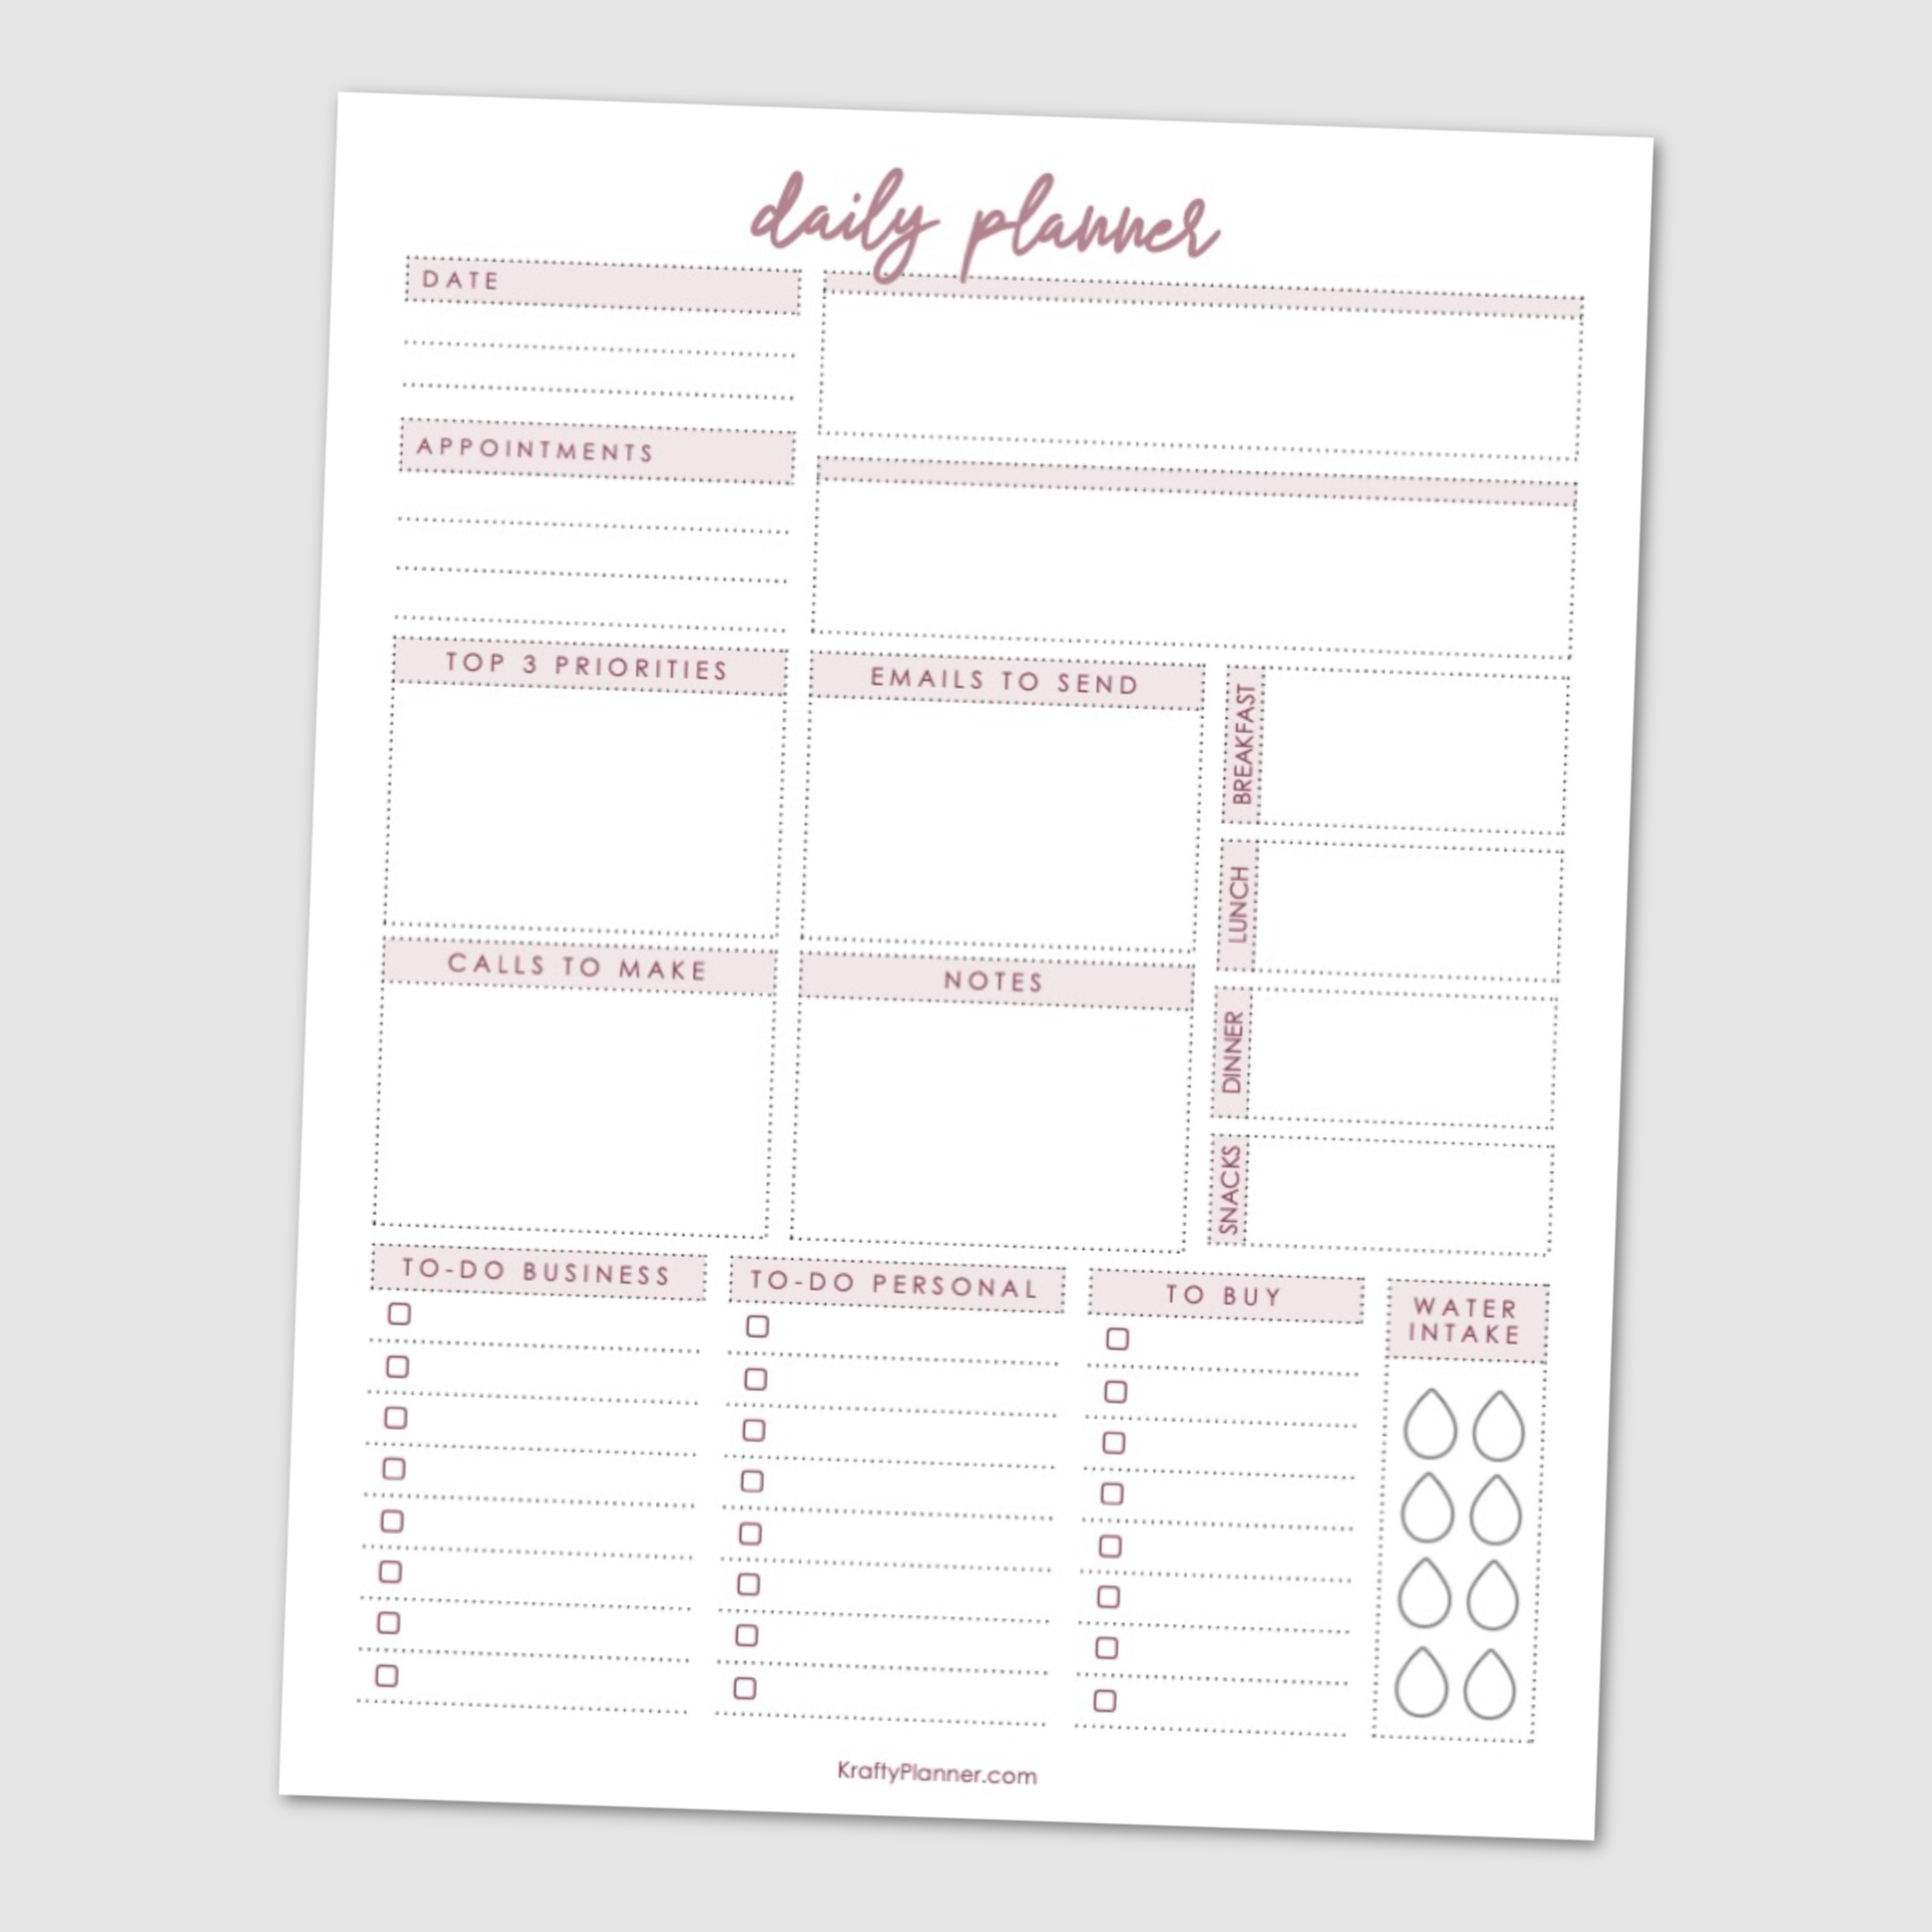 editable-routine-checklist-daily-planner-printable-images